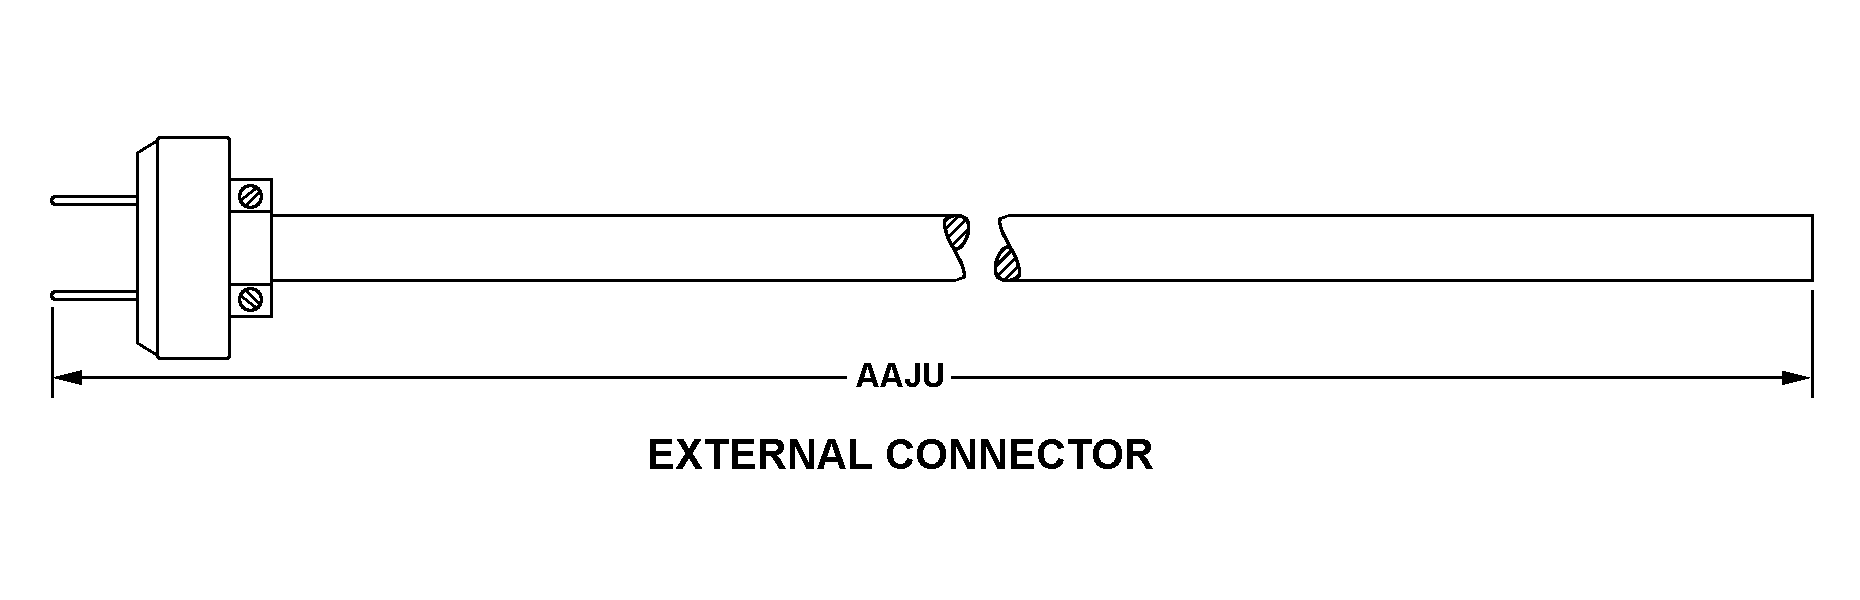 EXTERNAL CONNECTOR style nsn 5995-01-379-7240